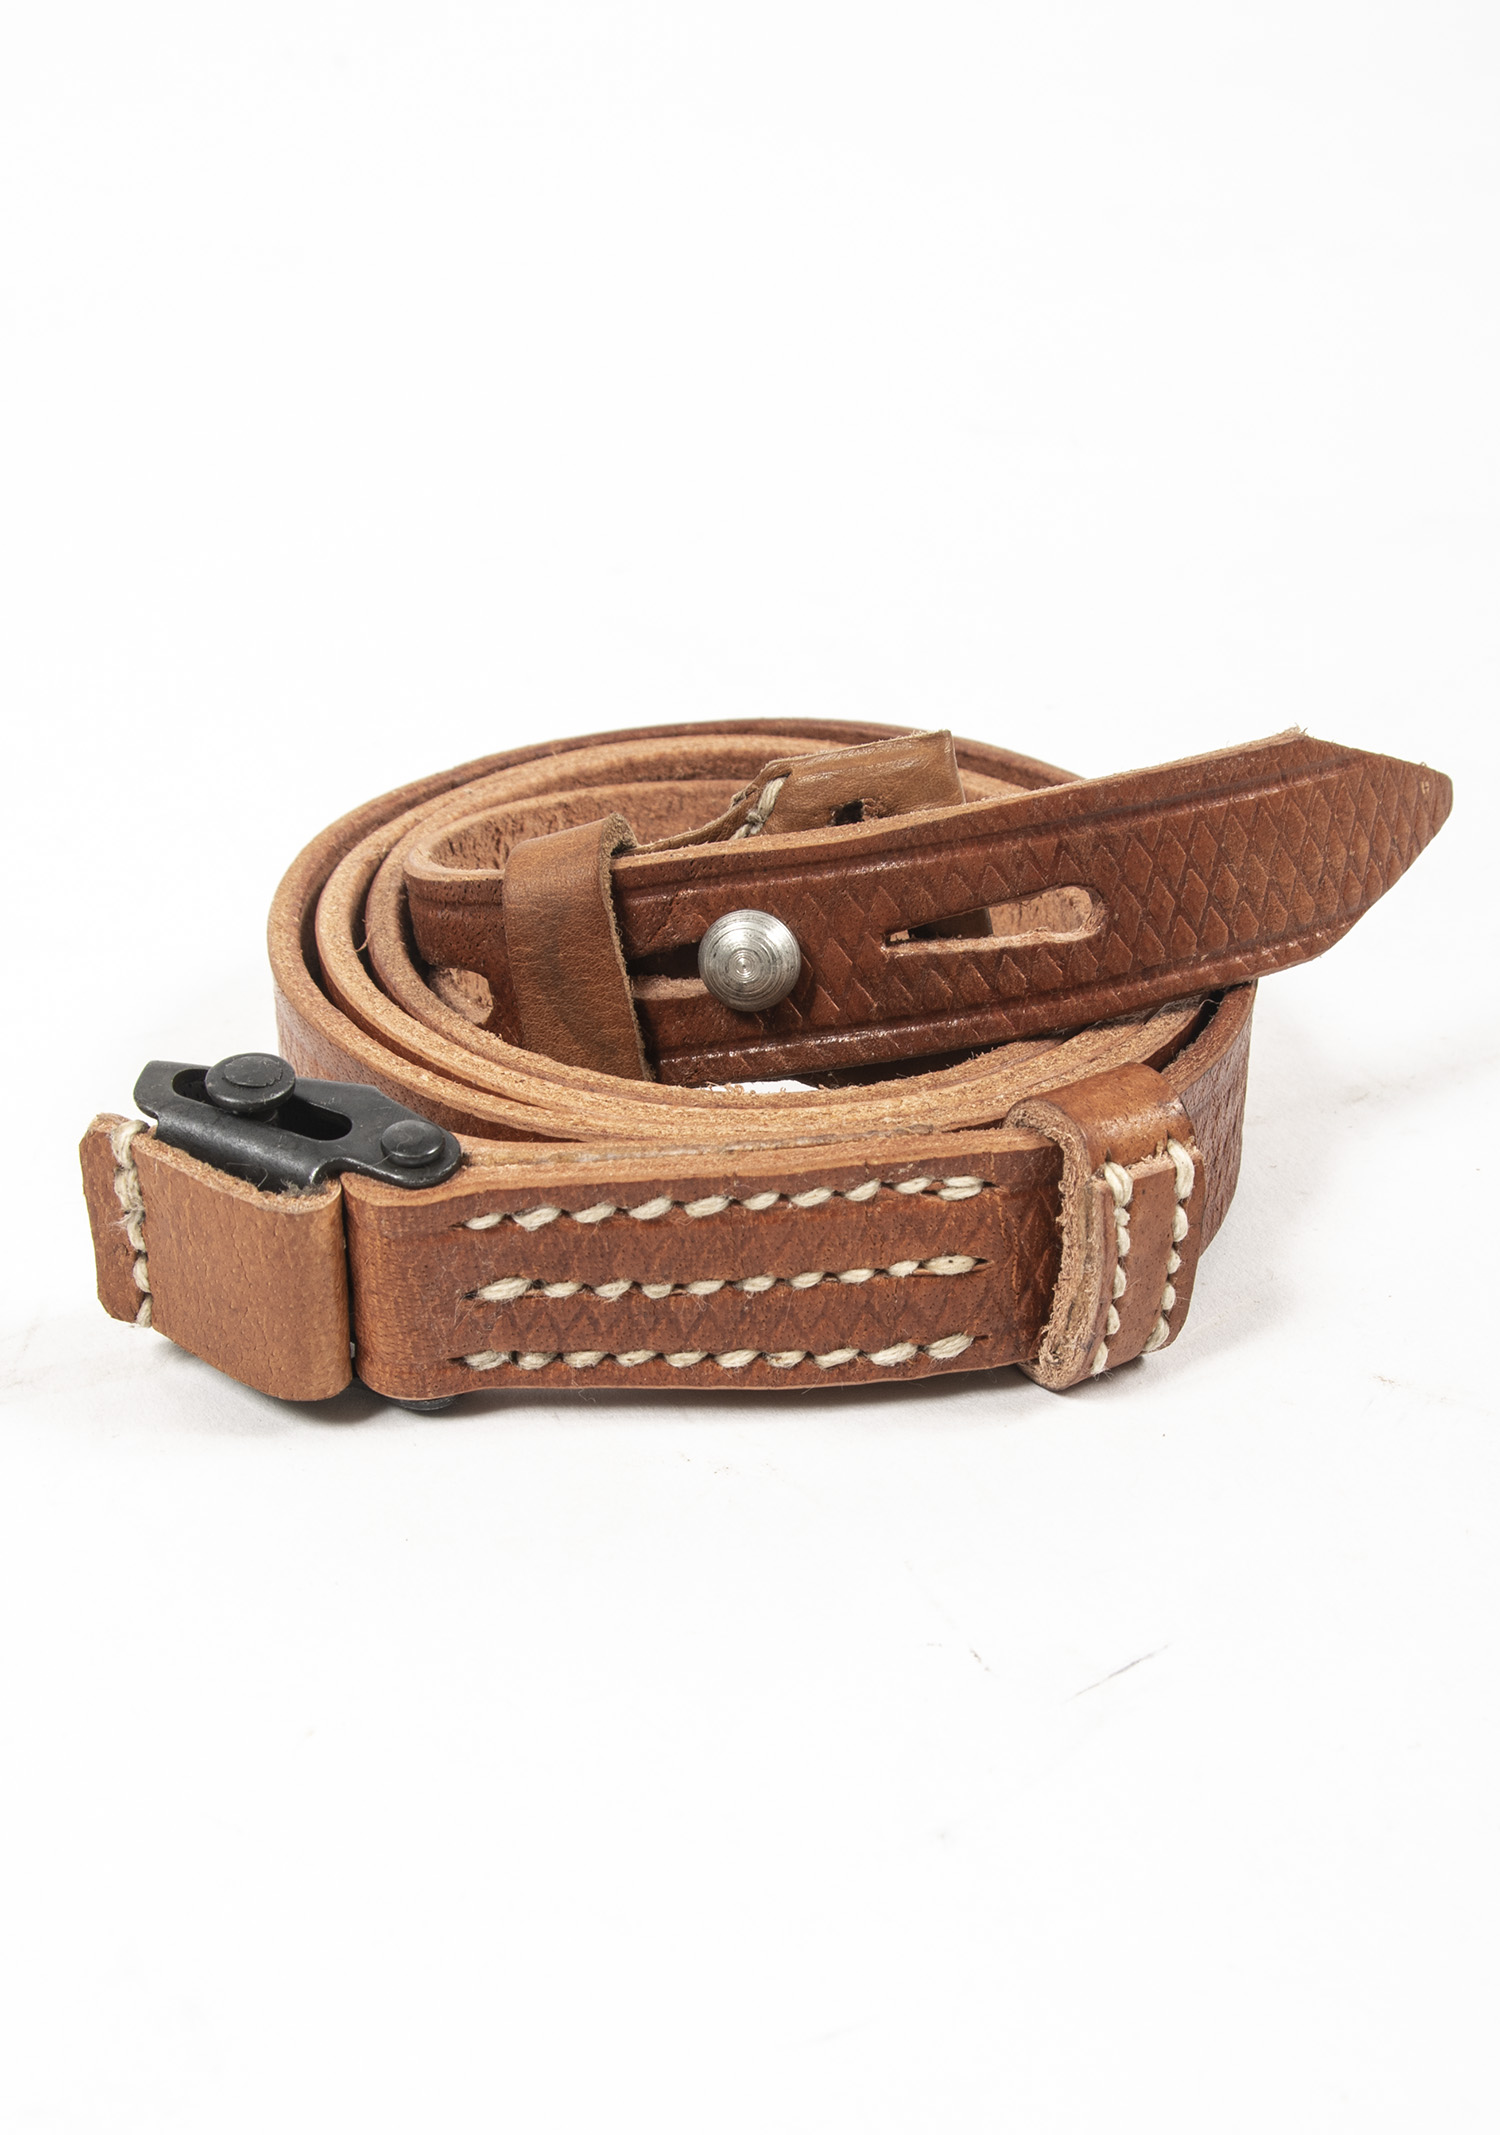 ORIGINAL WWII GERMAN BROWN LEATHER RIFLE STRAP SLING FOR MAUSER K98